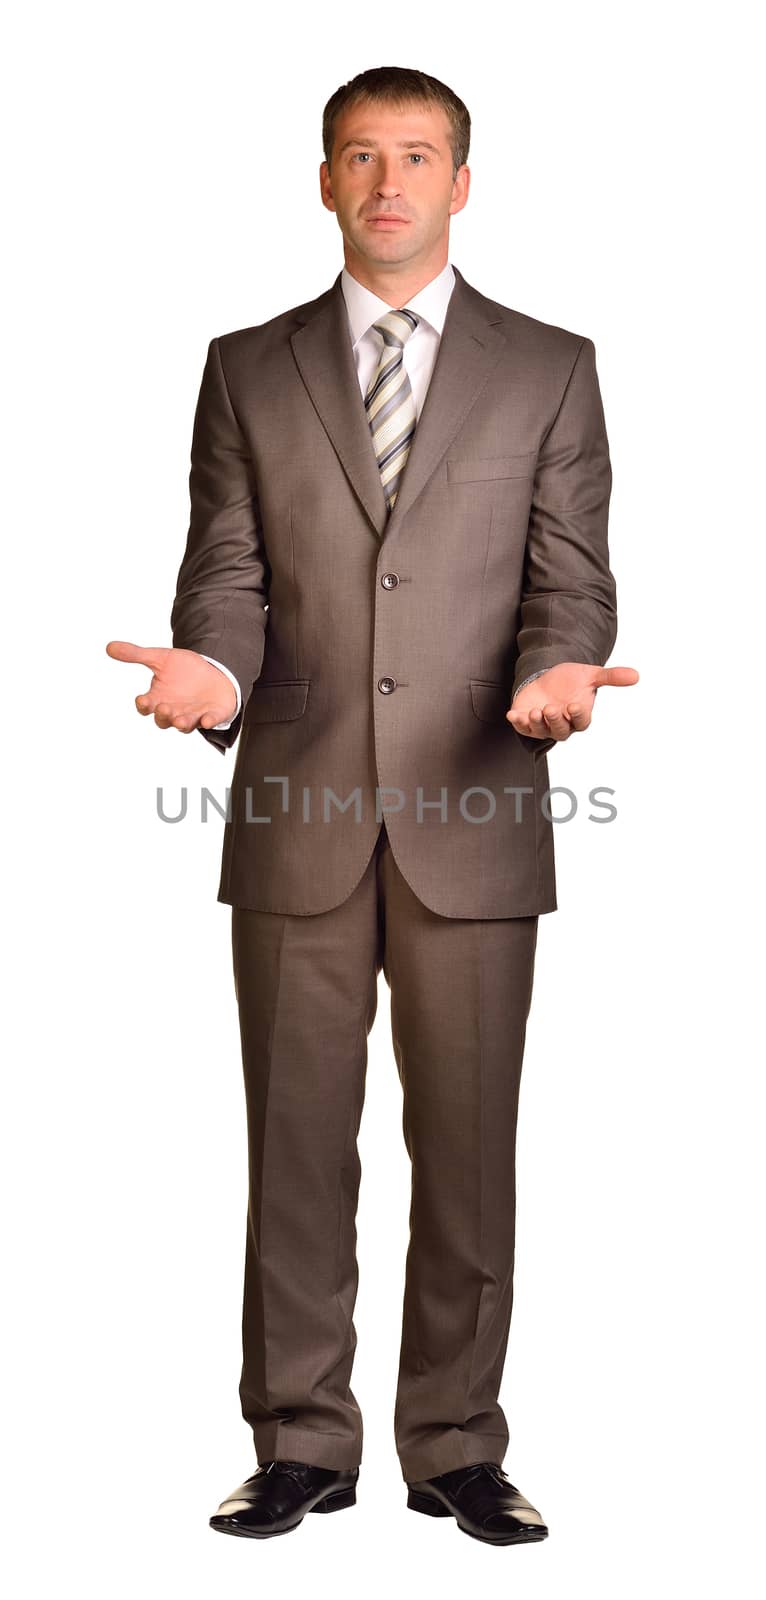 Businessman holds her hands in front of him. Isolated white background